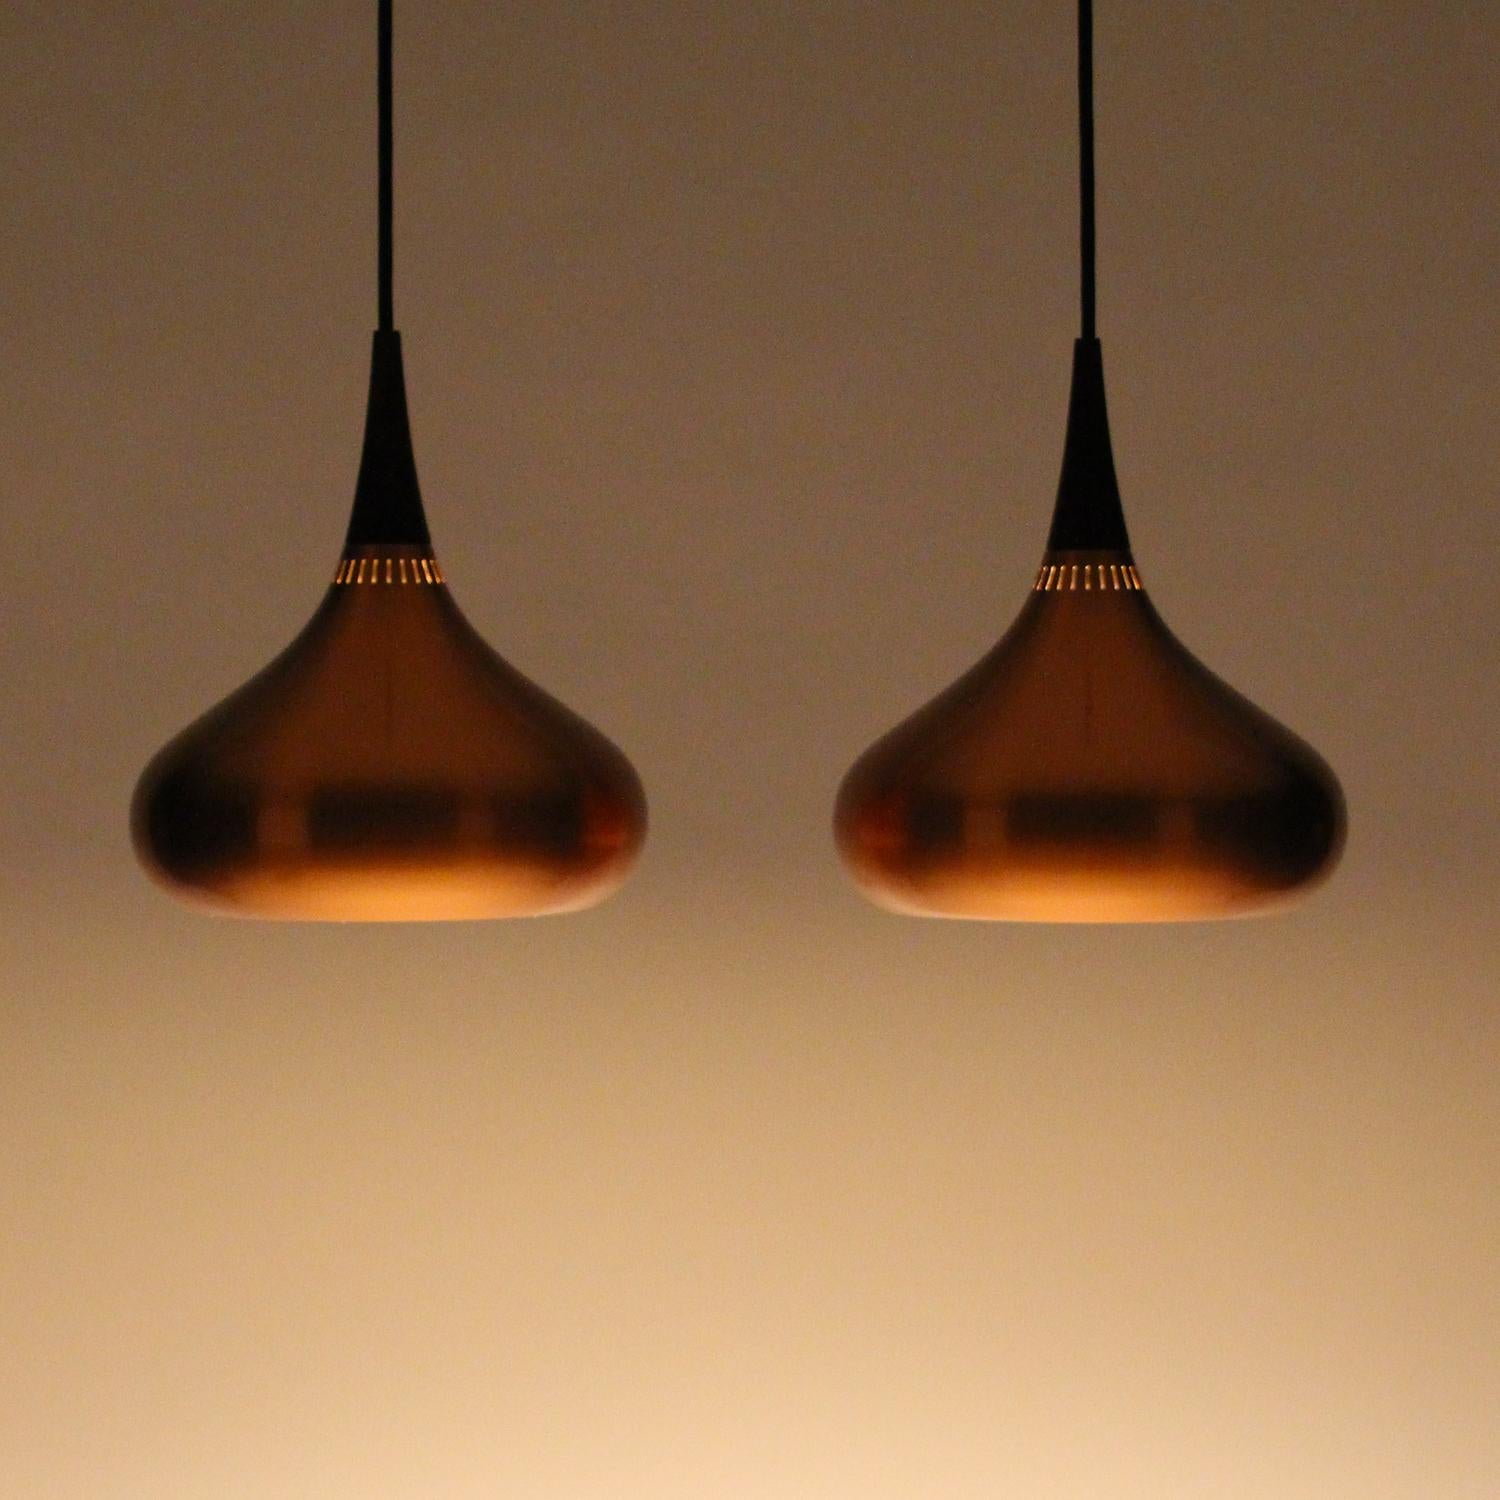 Orient Minor copper pendant pair by Jo Hammerborg for Fog & Mørup in 1963 - super attractive pair of copper lamps with rosewood tops, in very good vintage condition.

An attractive pendant pair made in solid copper with teardrop-shaped shade and a